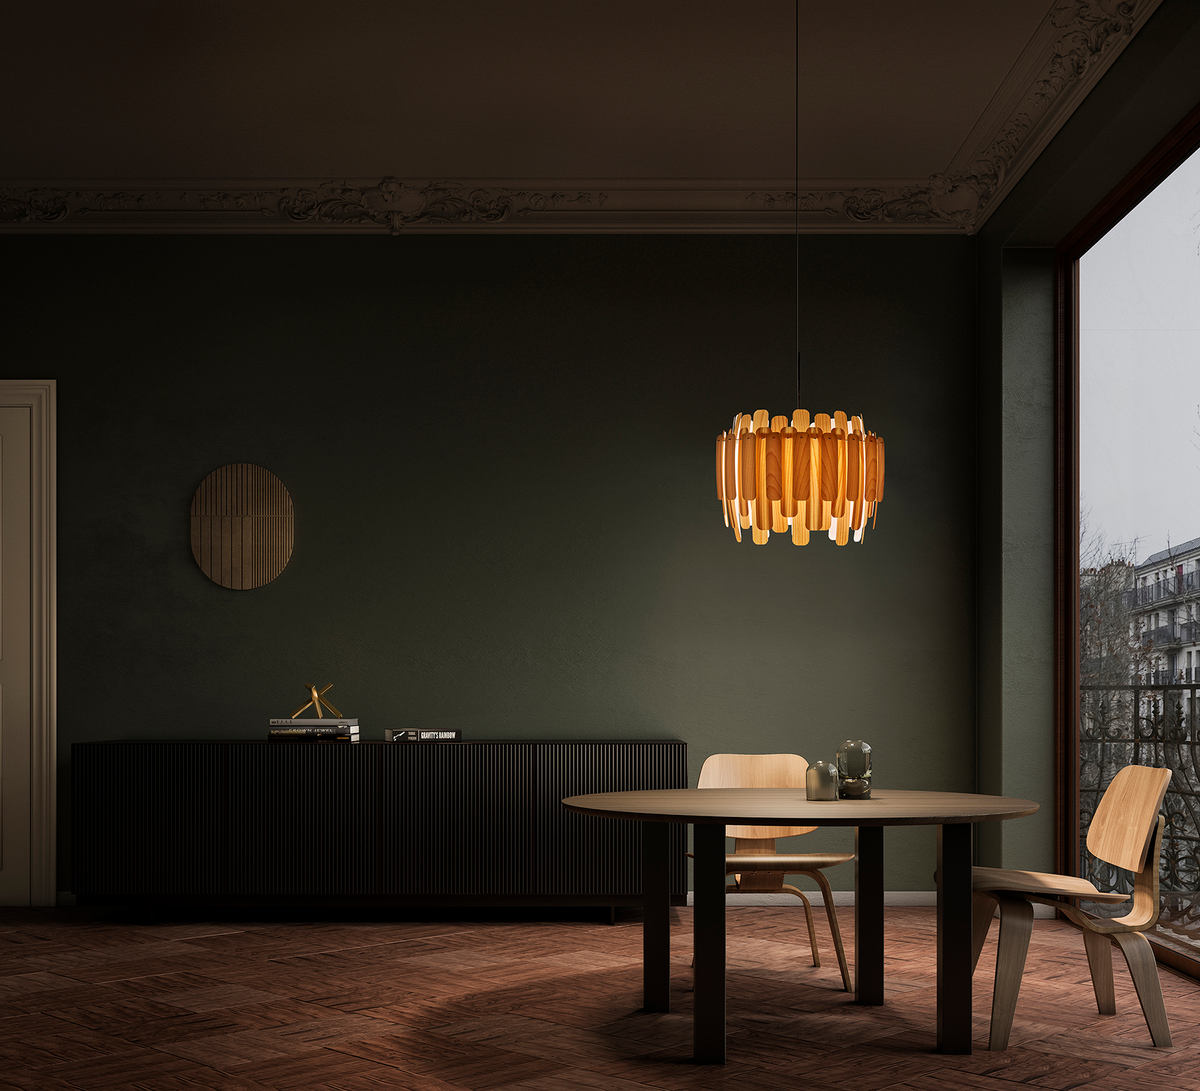 Amber pendant light above a dining set in a dark green room.